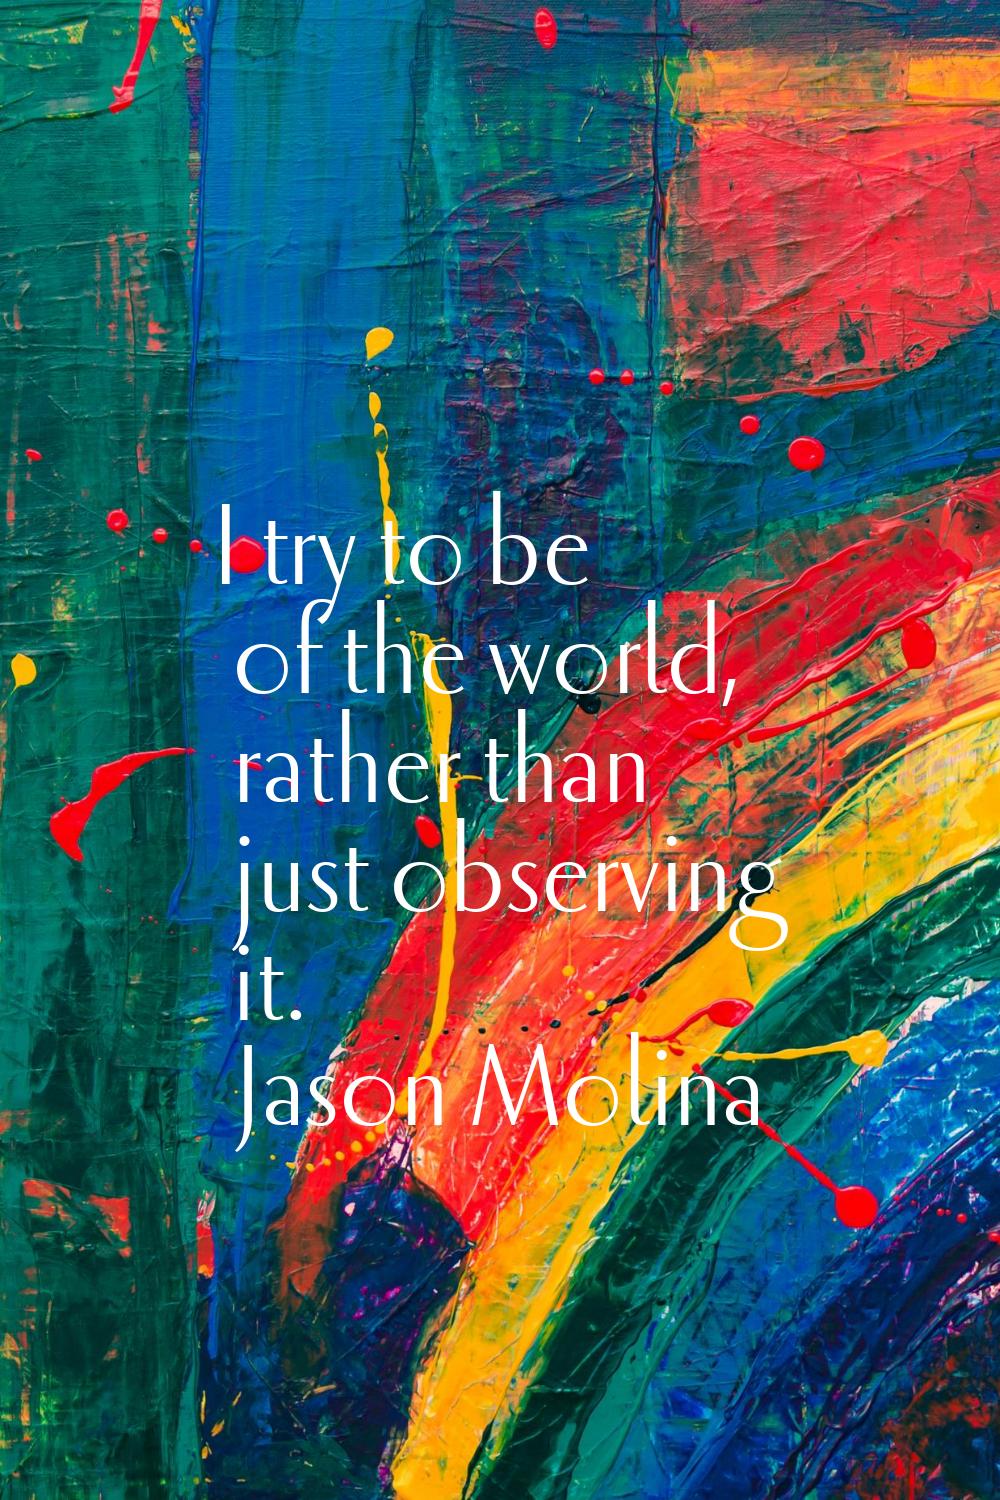 I try to be of the world, rather than just observing it.